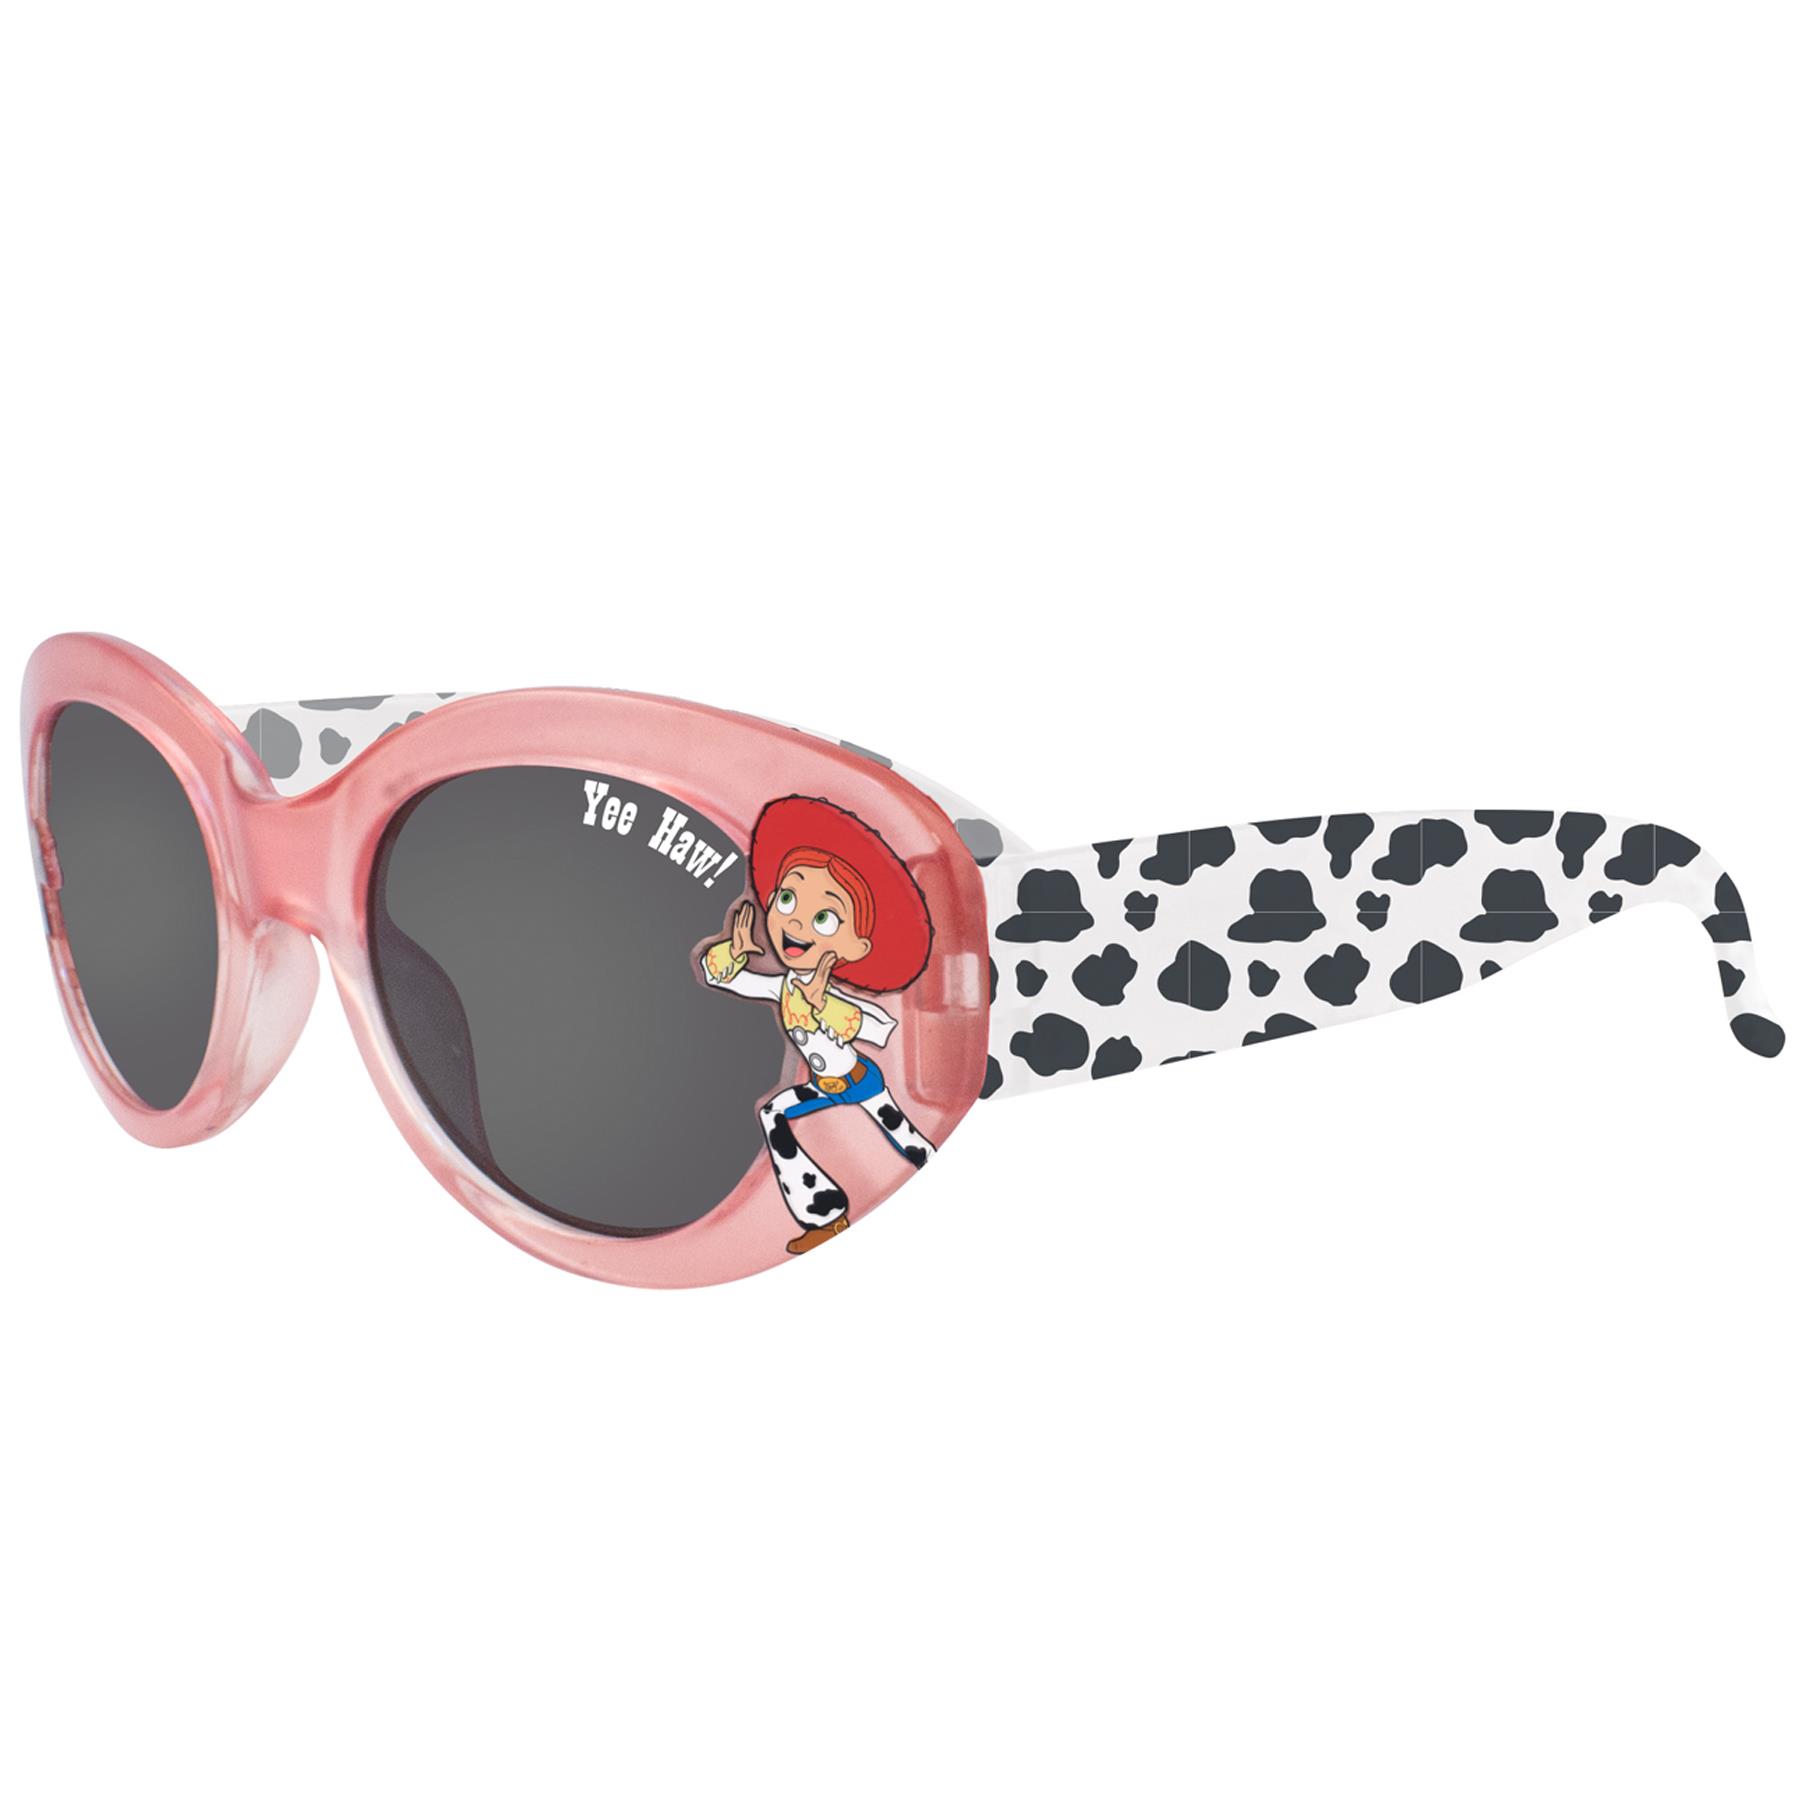 Children's TV Character Sunglasses UV protection for Holiday - Disney Toy Story TOY2